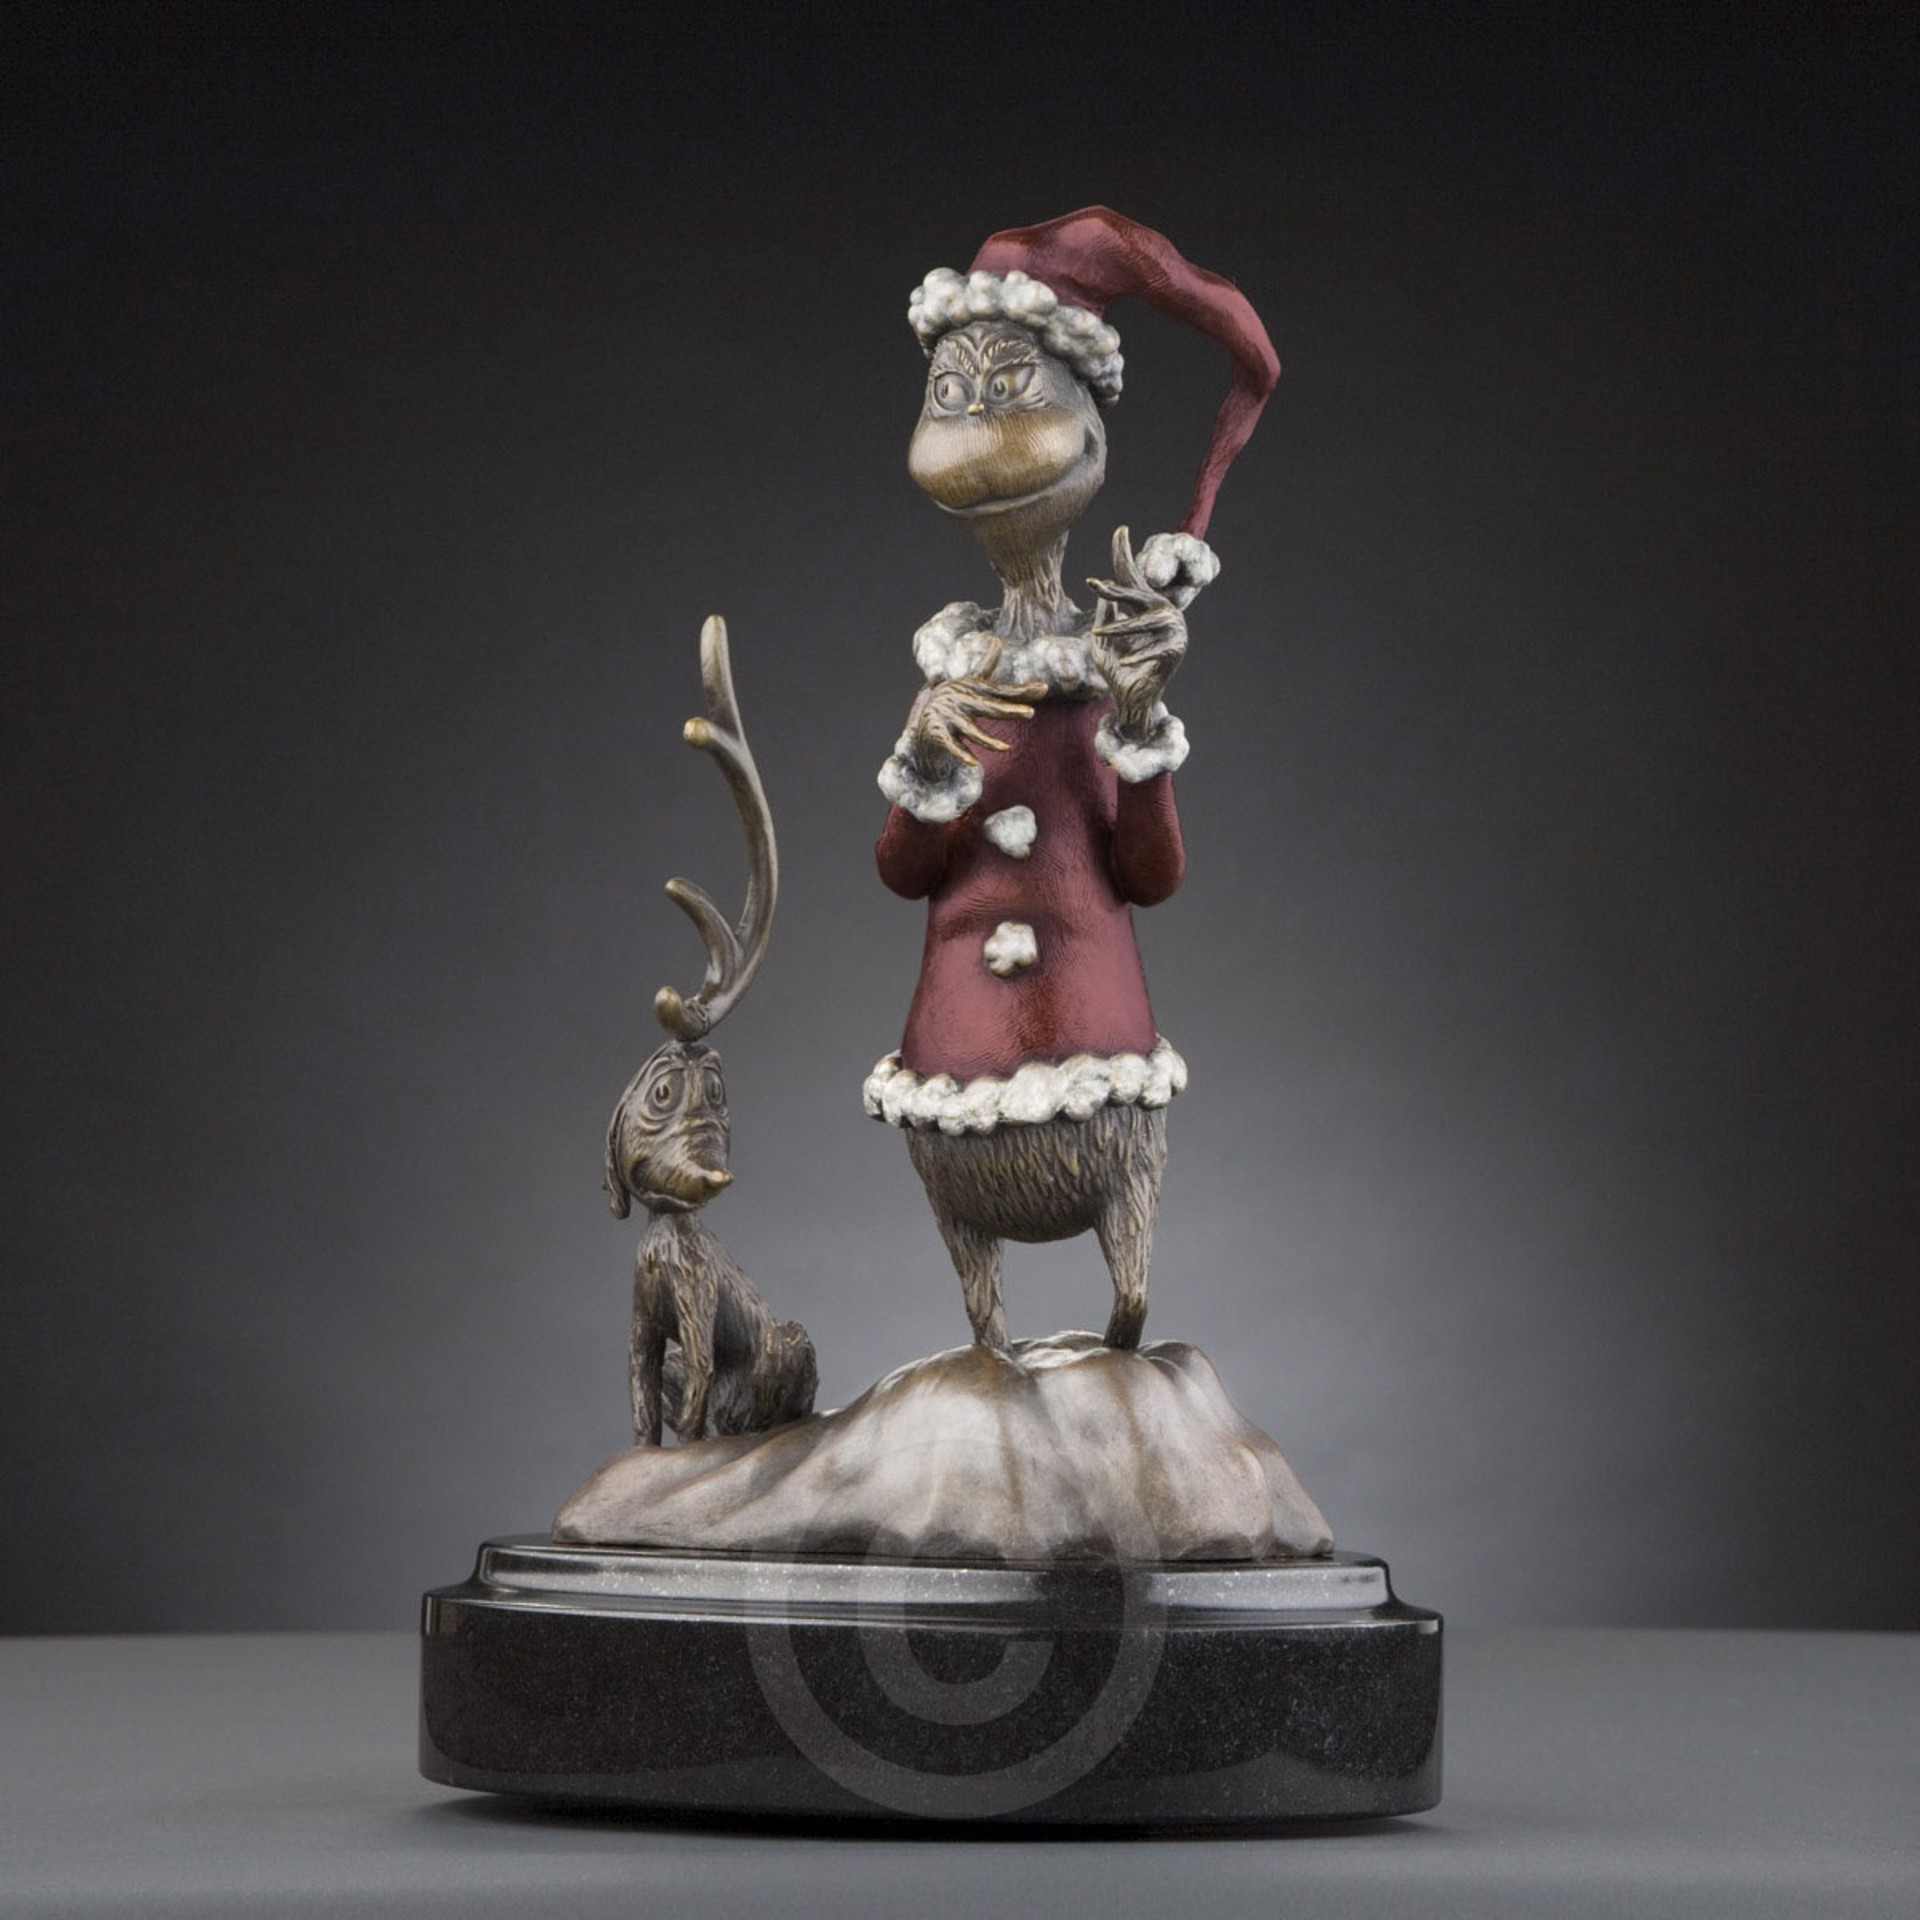 The Grinch (Maquette) by Dr. Seuss